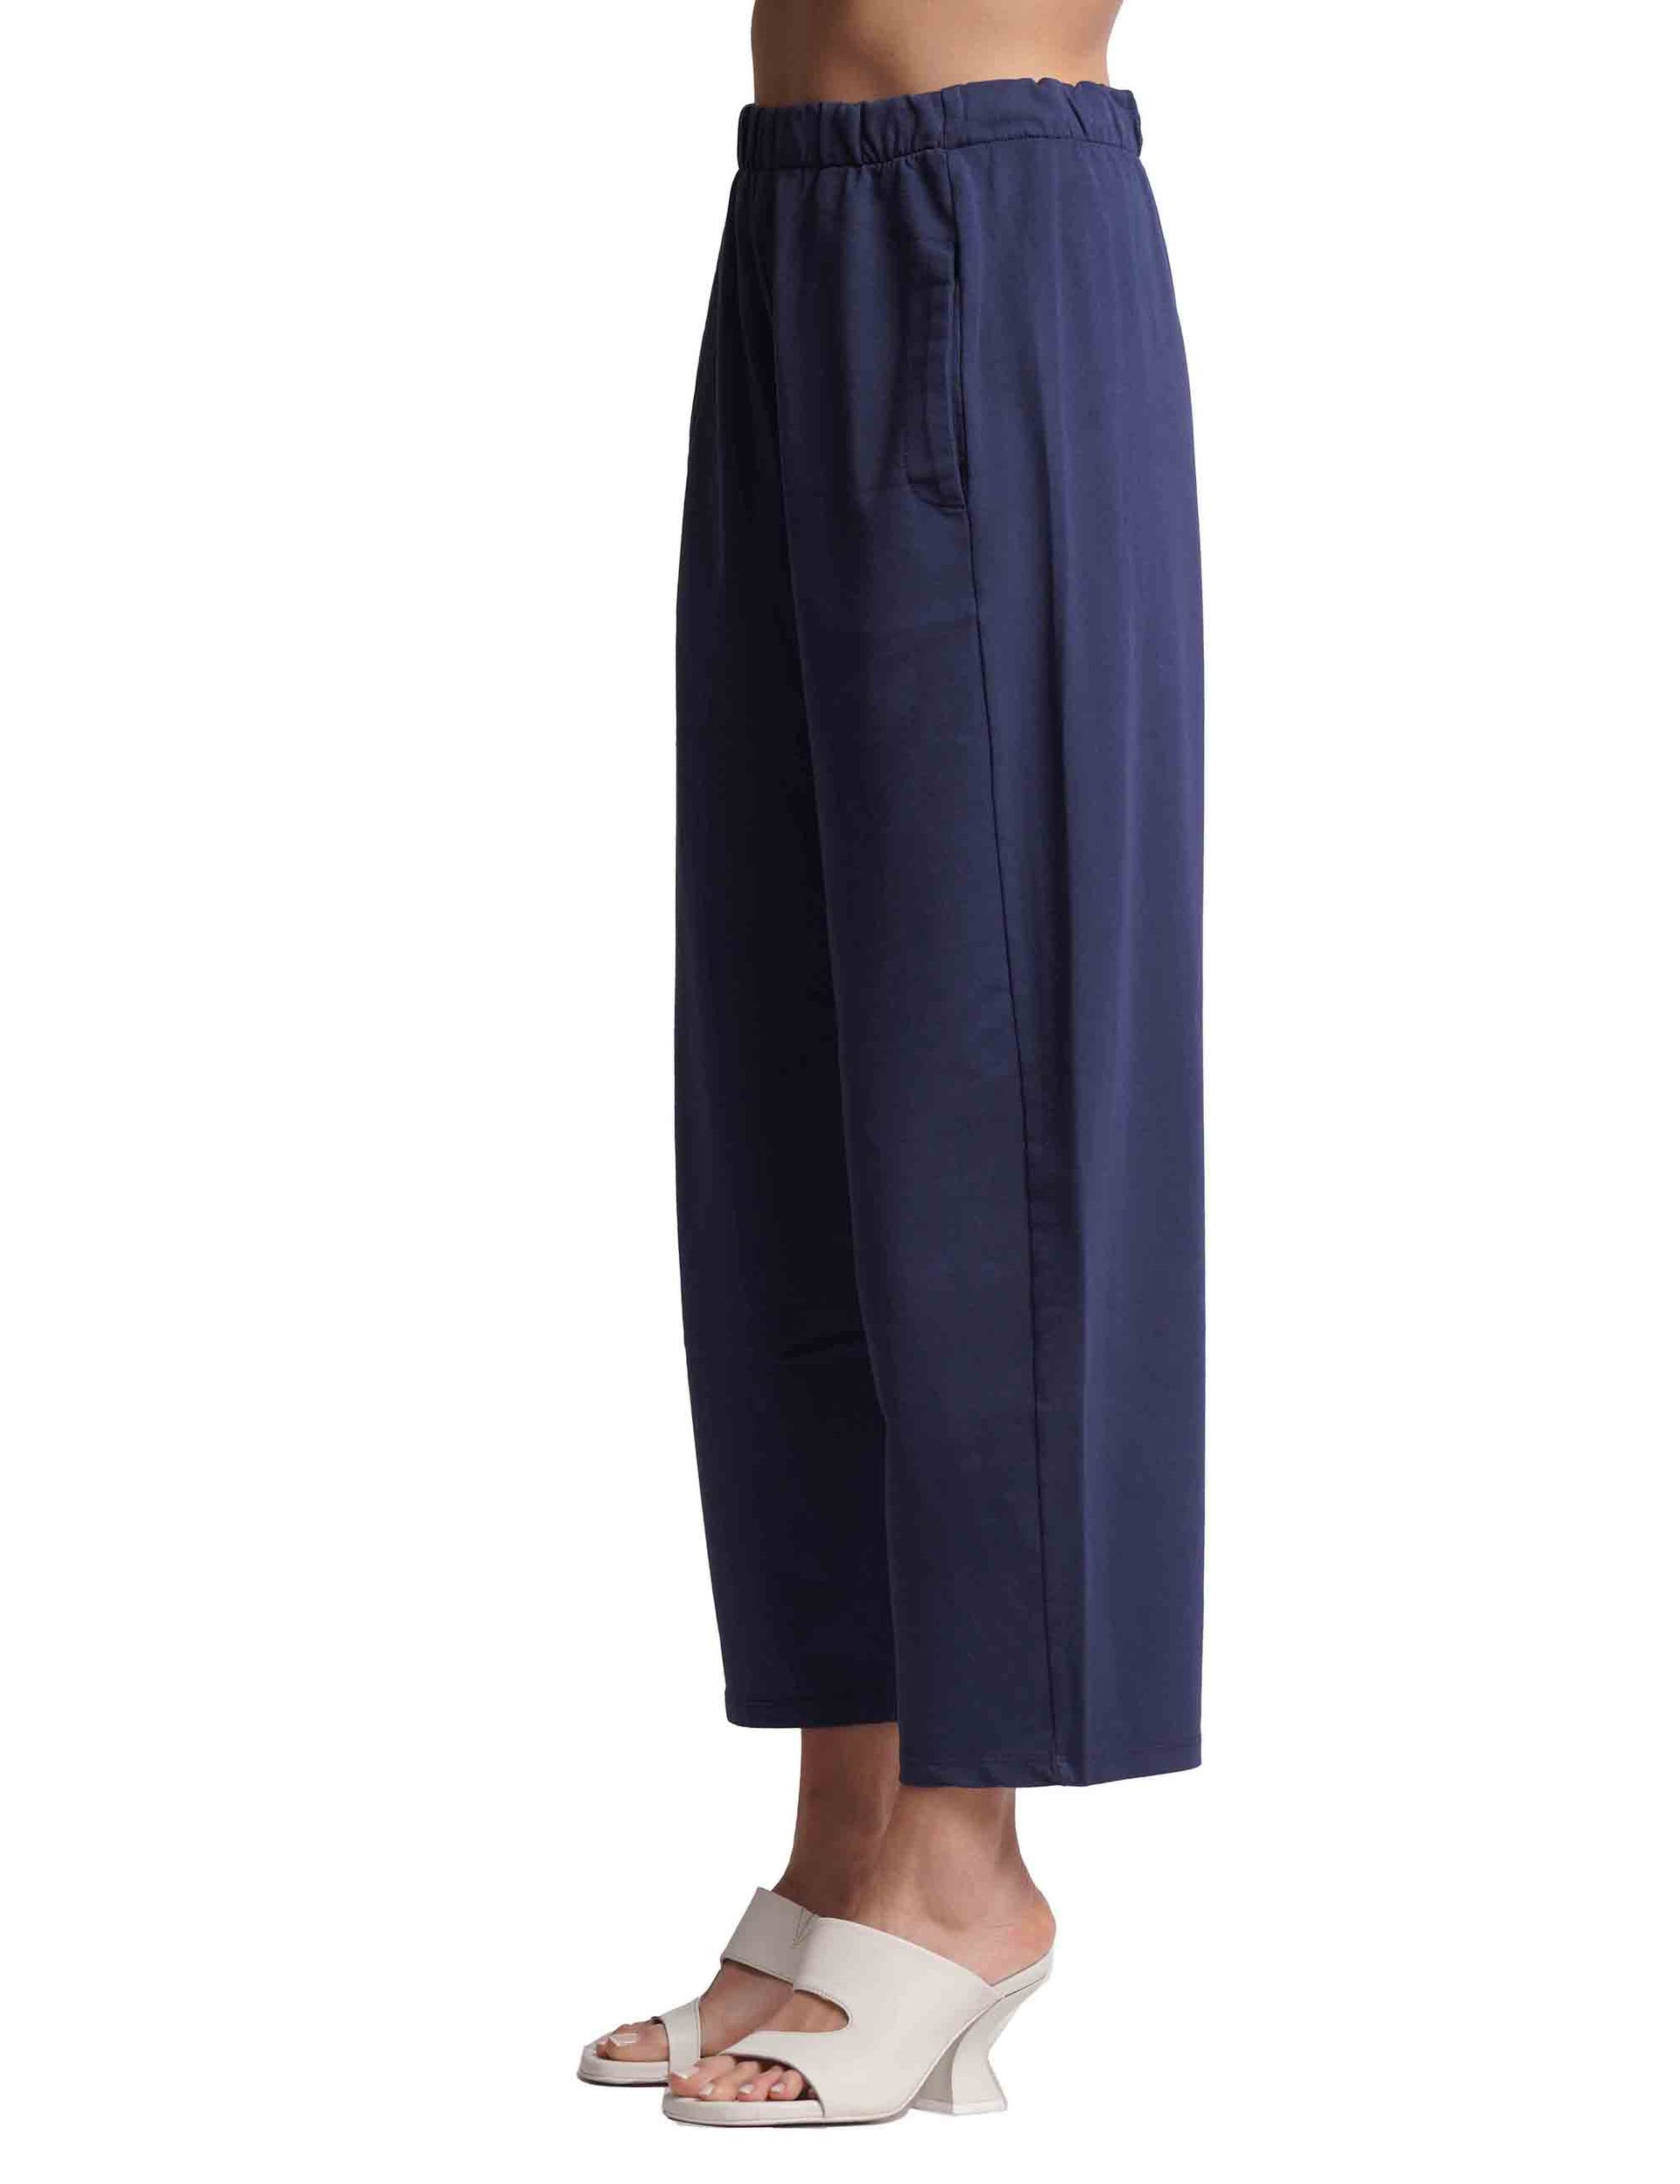 Women's blue cotton trousers with elastic waist